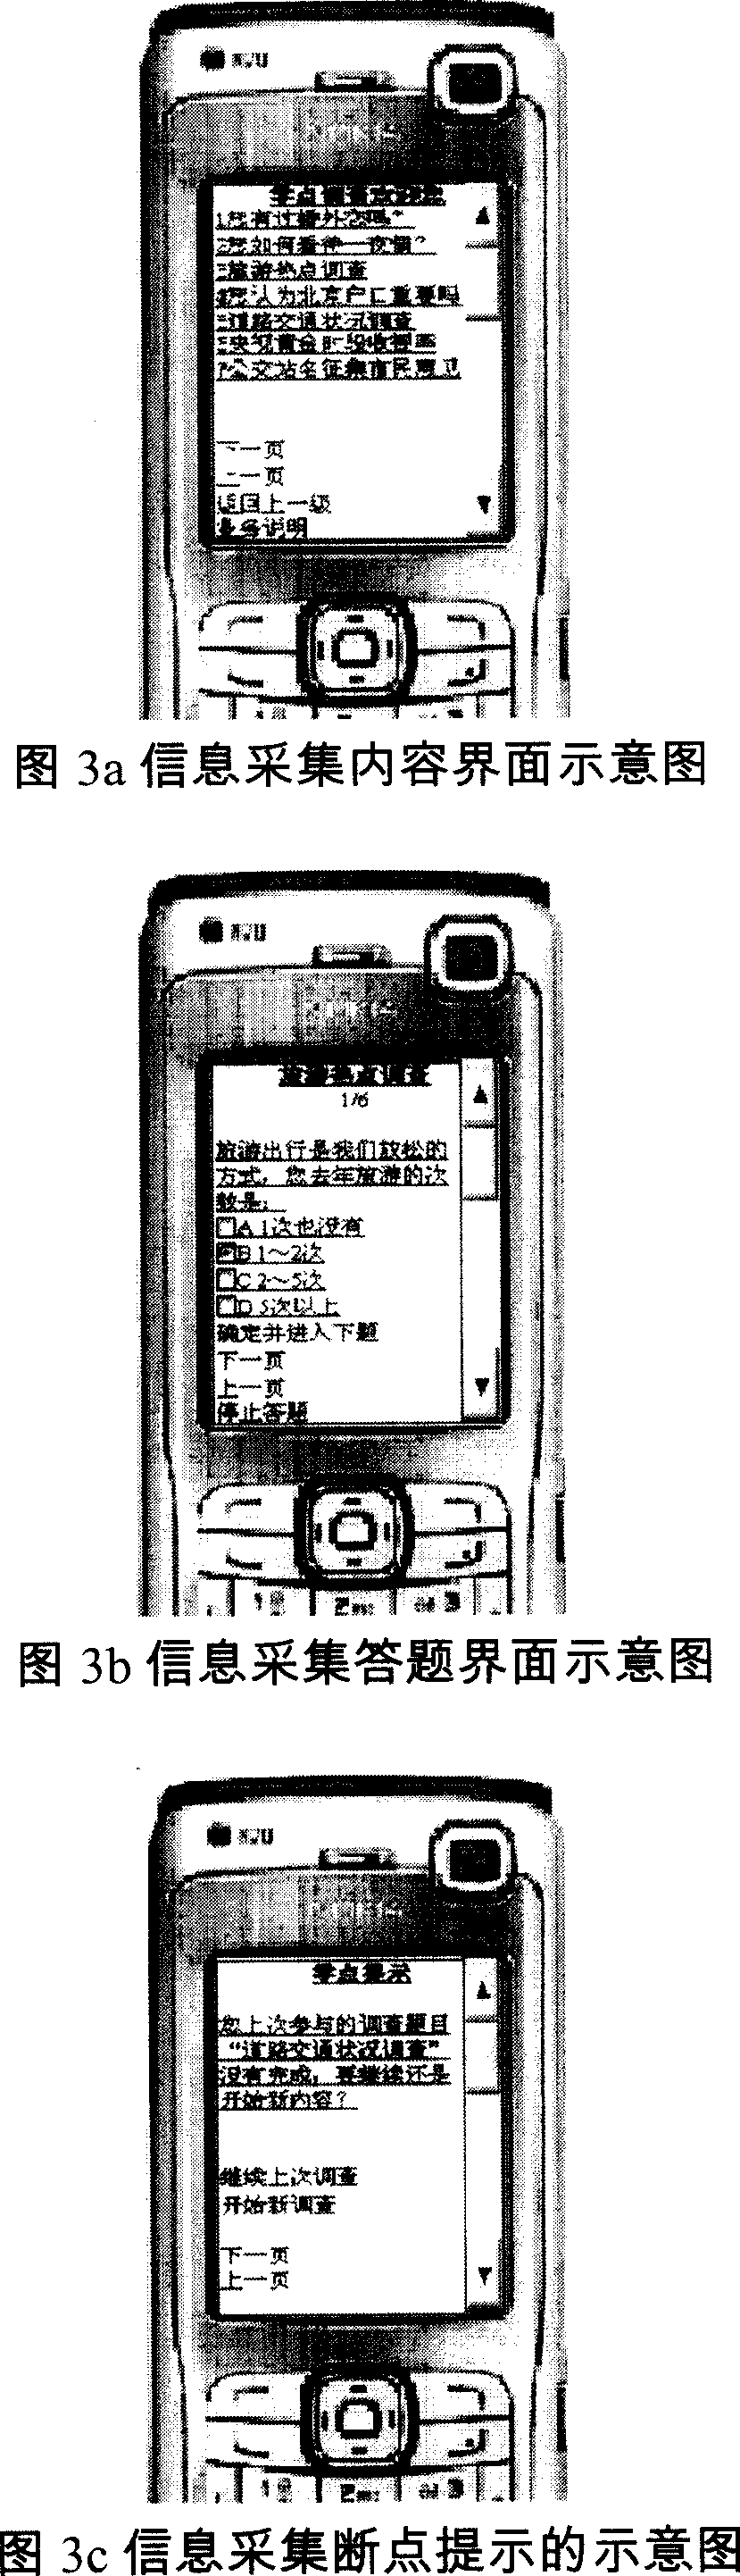 Method for collecting information by mobile terminal log-on